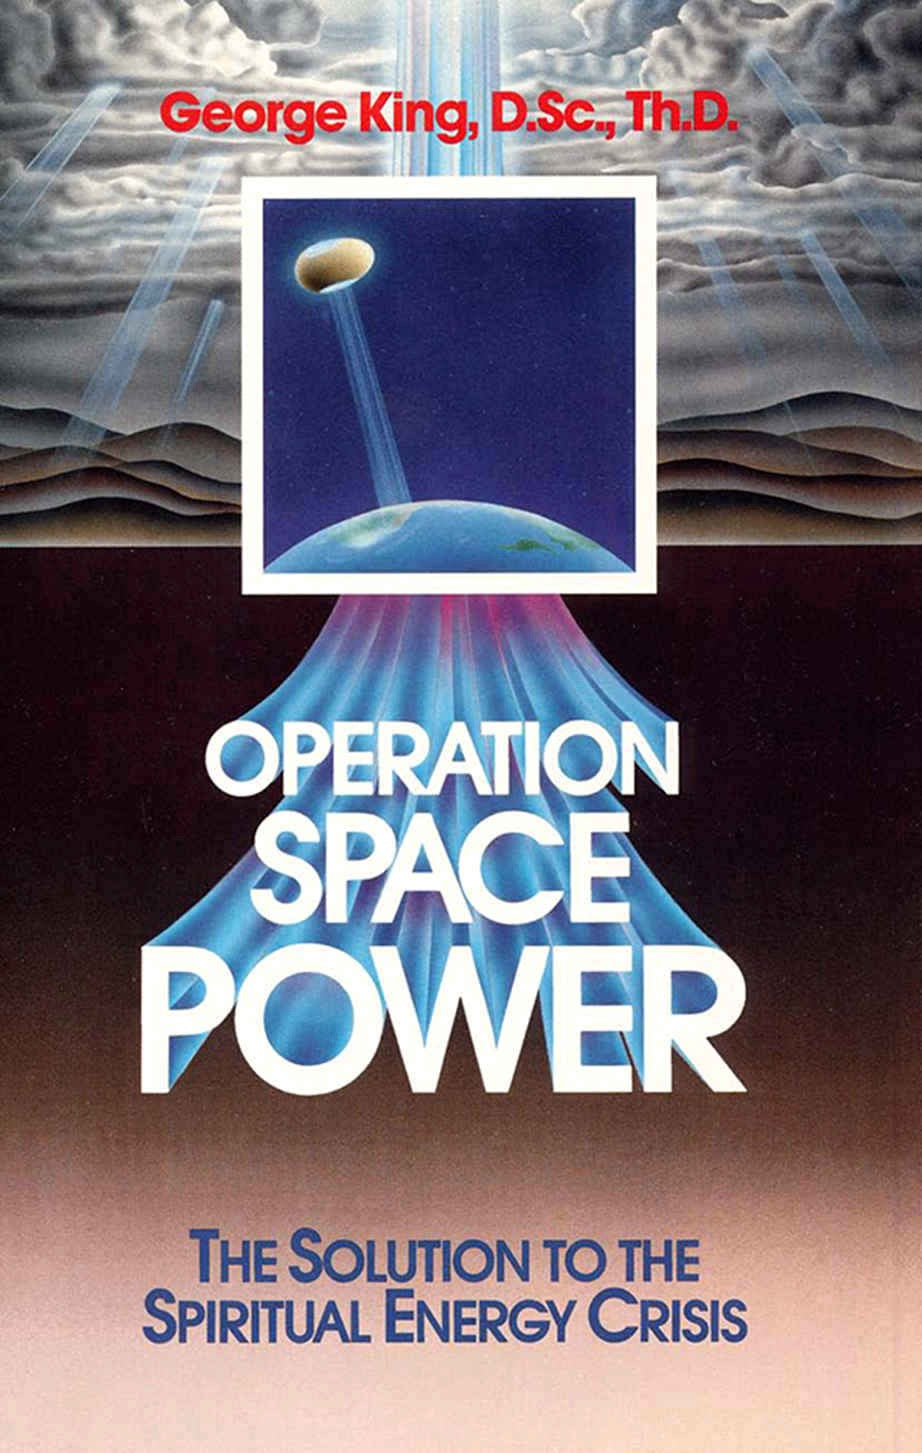 Operation space power: 0937249122